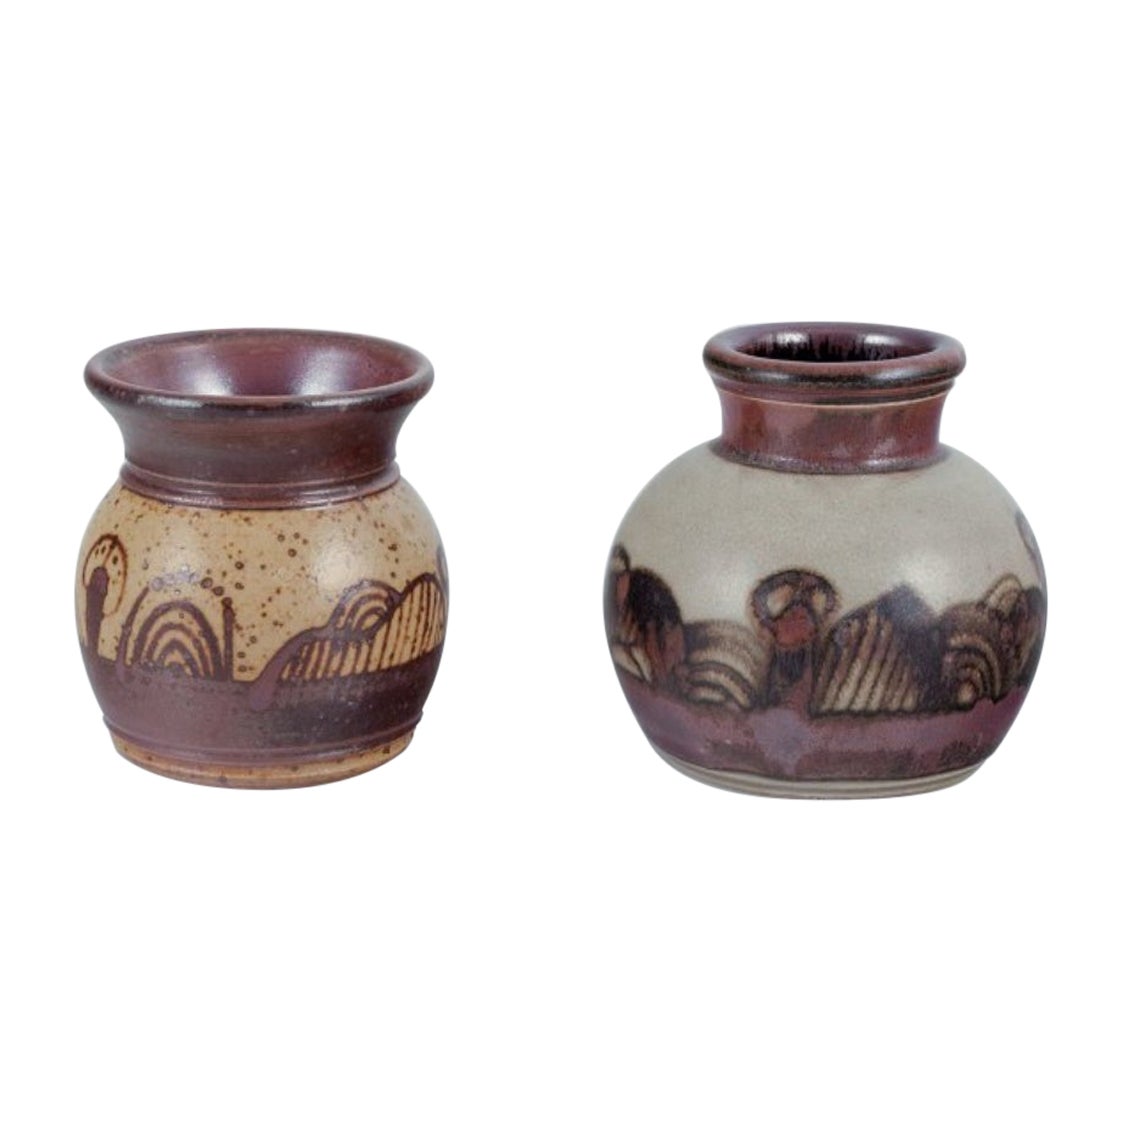 Elly Kuch and Wilhelm Kuch. Two ceramic vases in brown and sandy tones For Sale